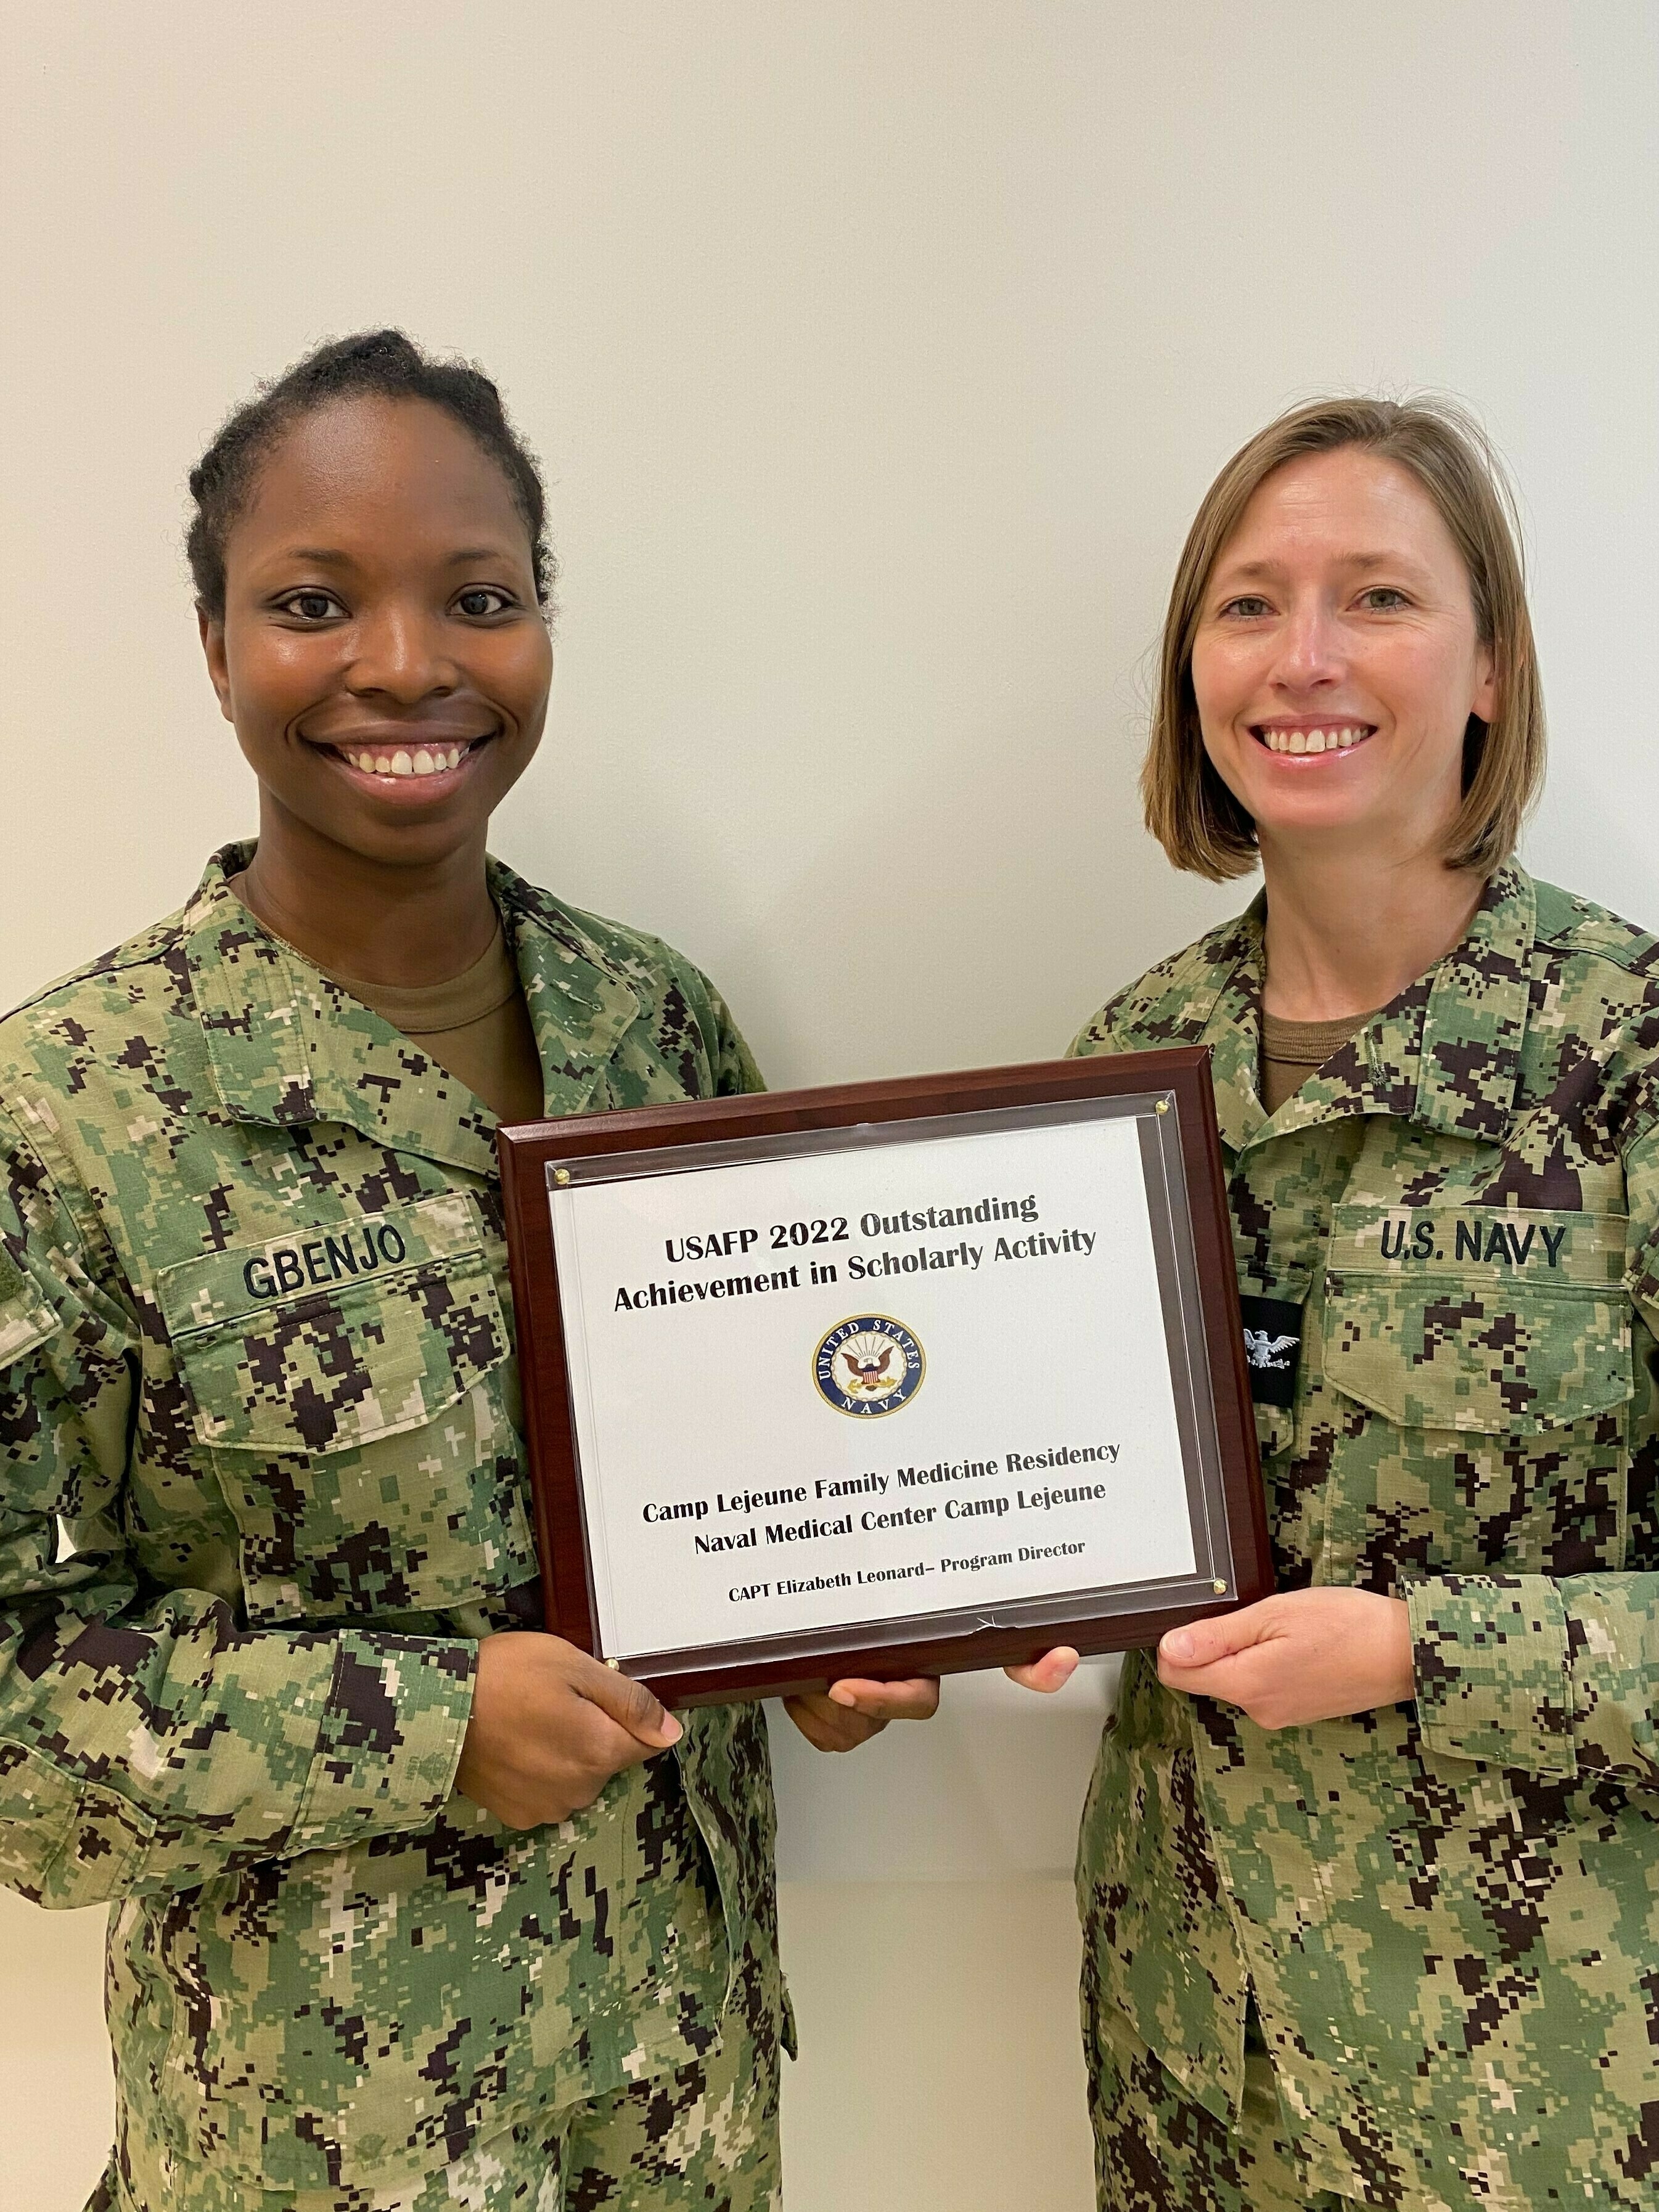 Image of Naval officers with the USMP 2022 Outstanding Achievement in Scholarly Activity Award